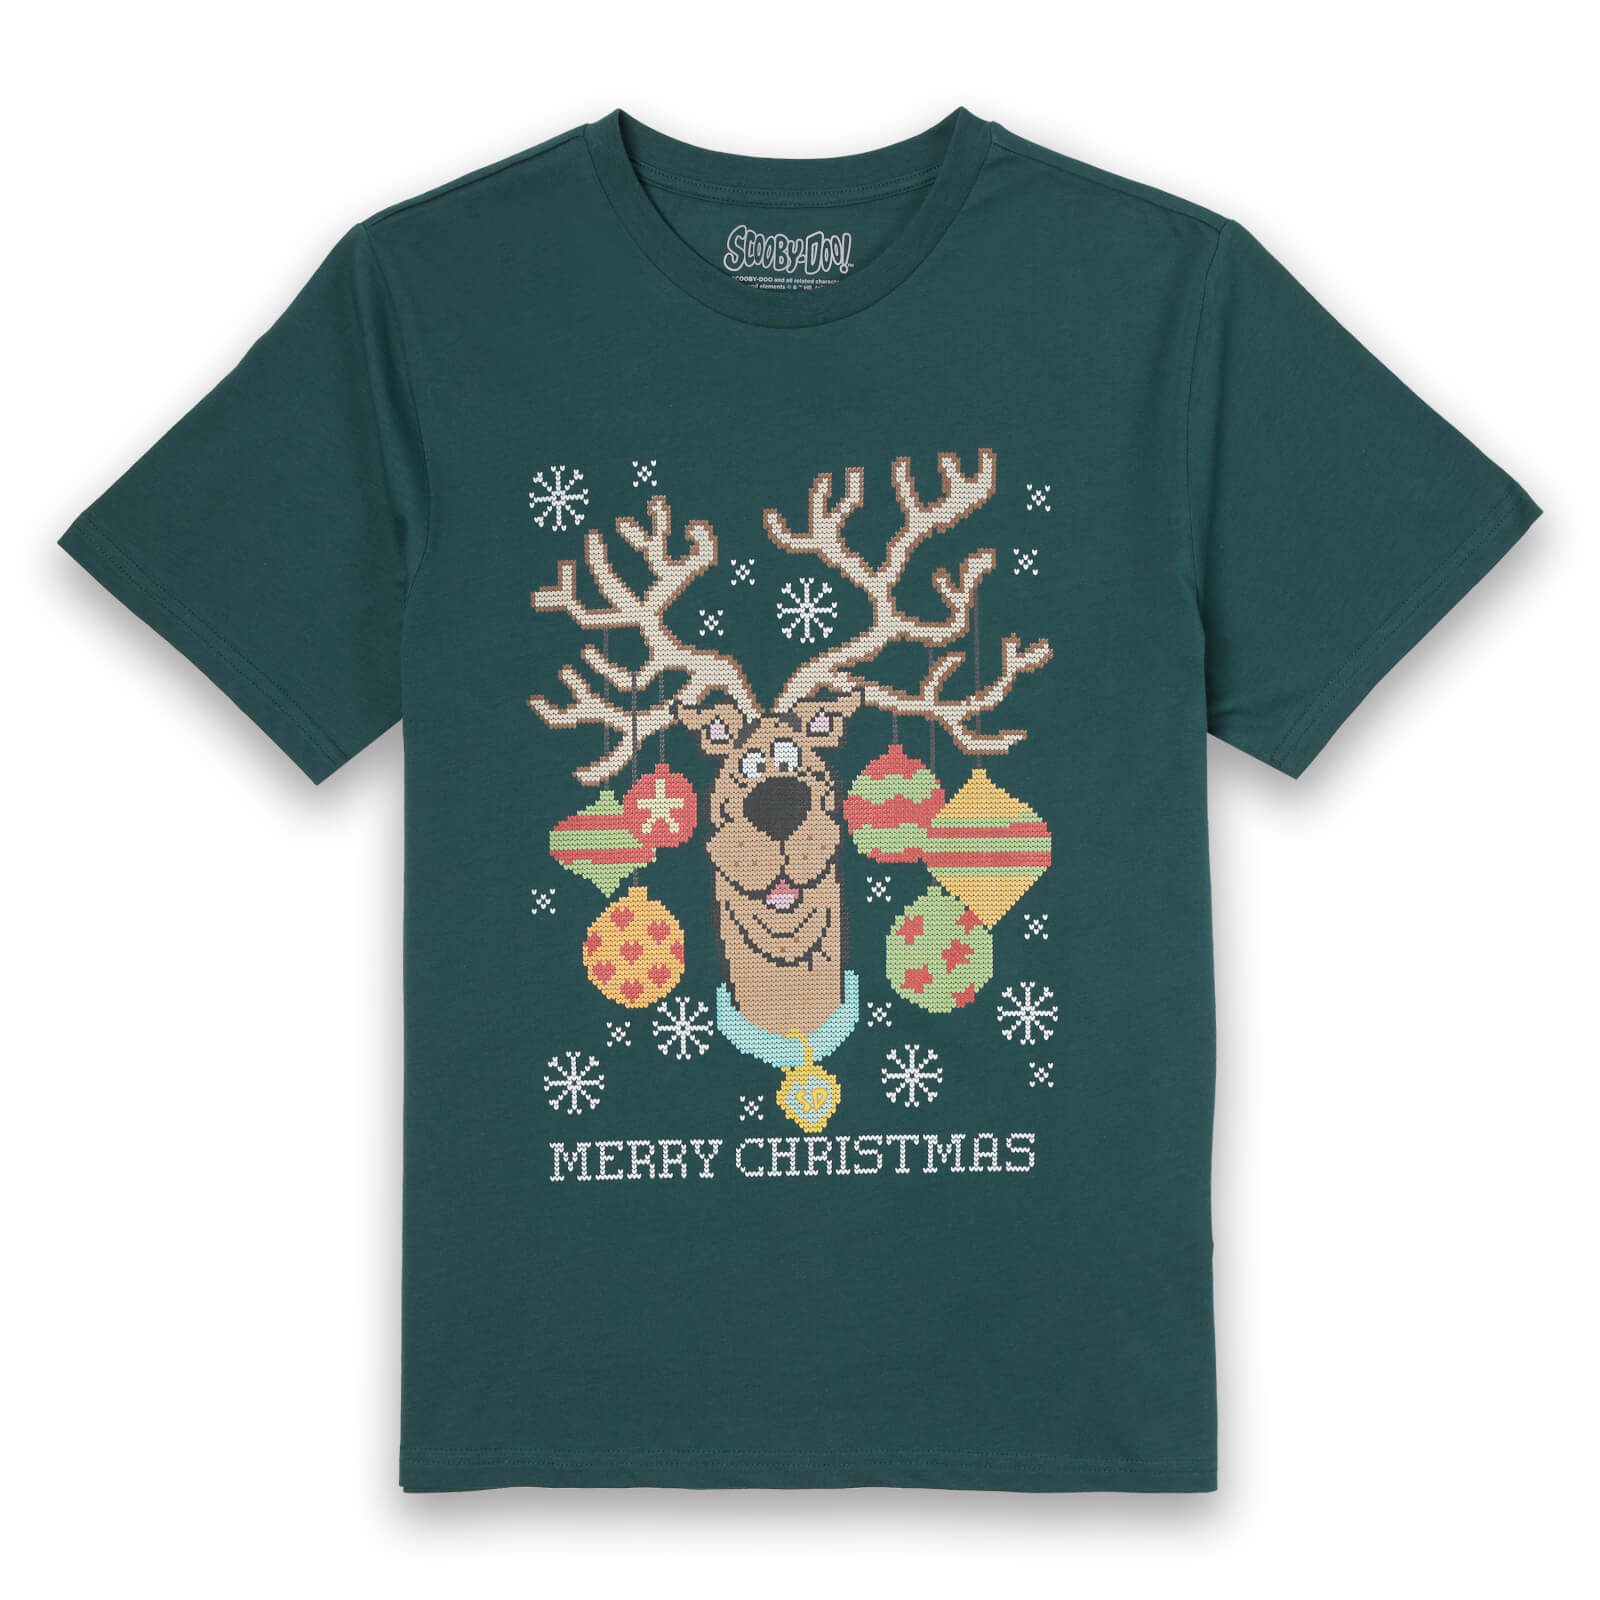 Scooby Doo Men's Christmas T-Shirt - Forest Green - M